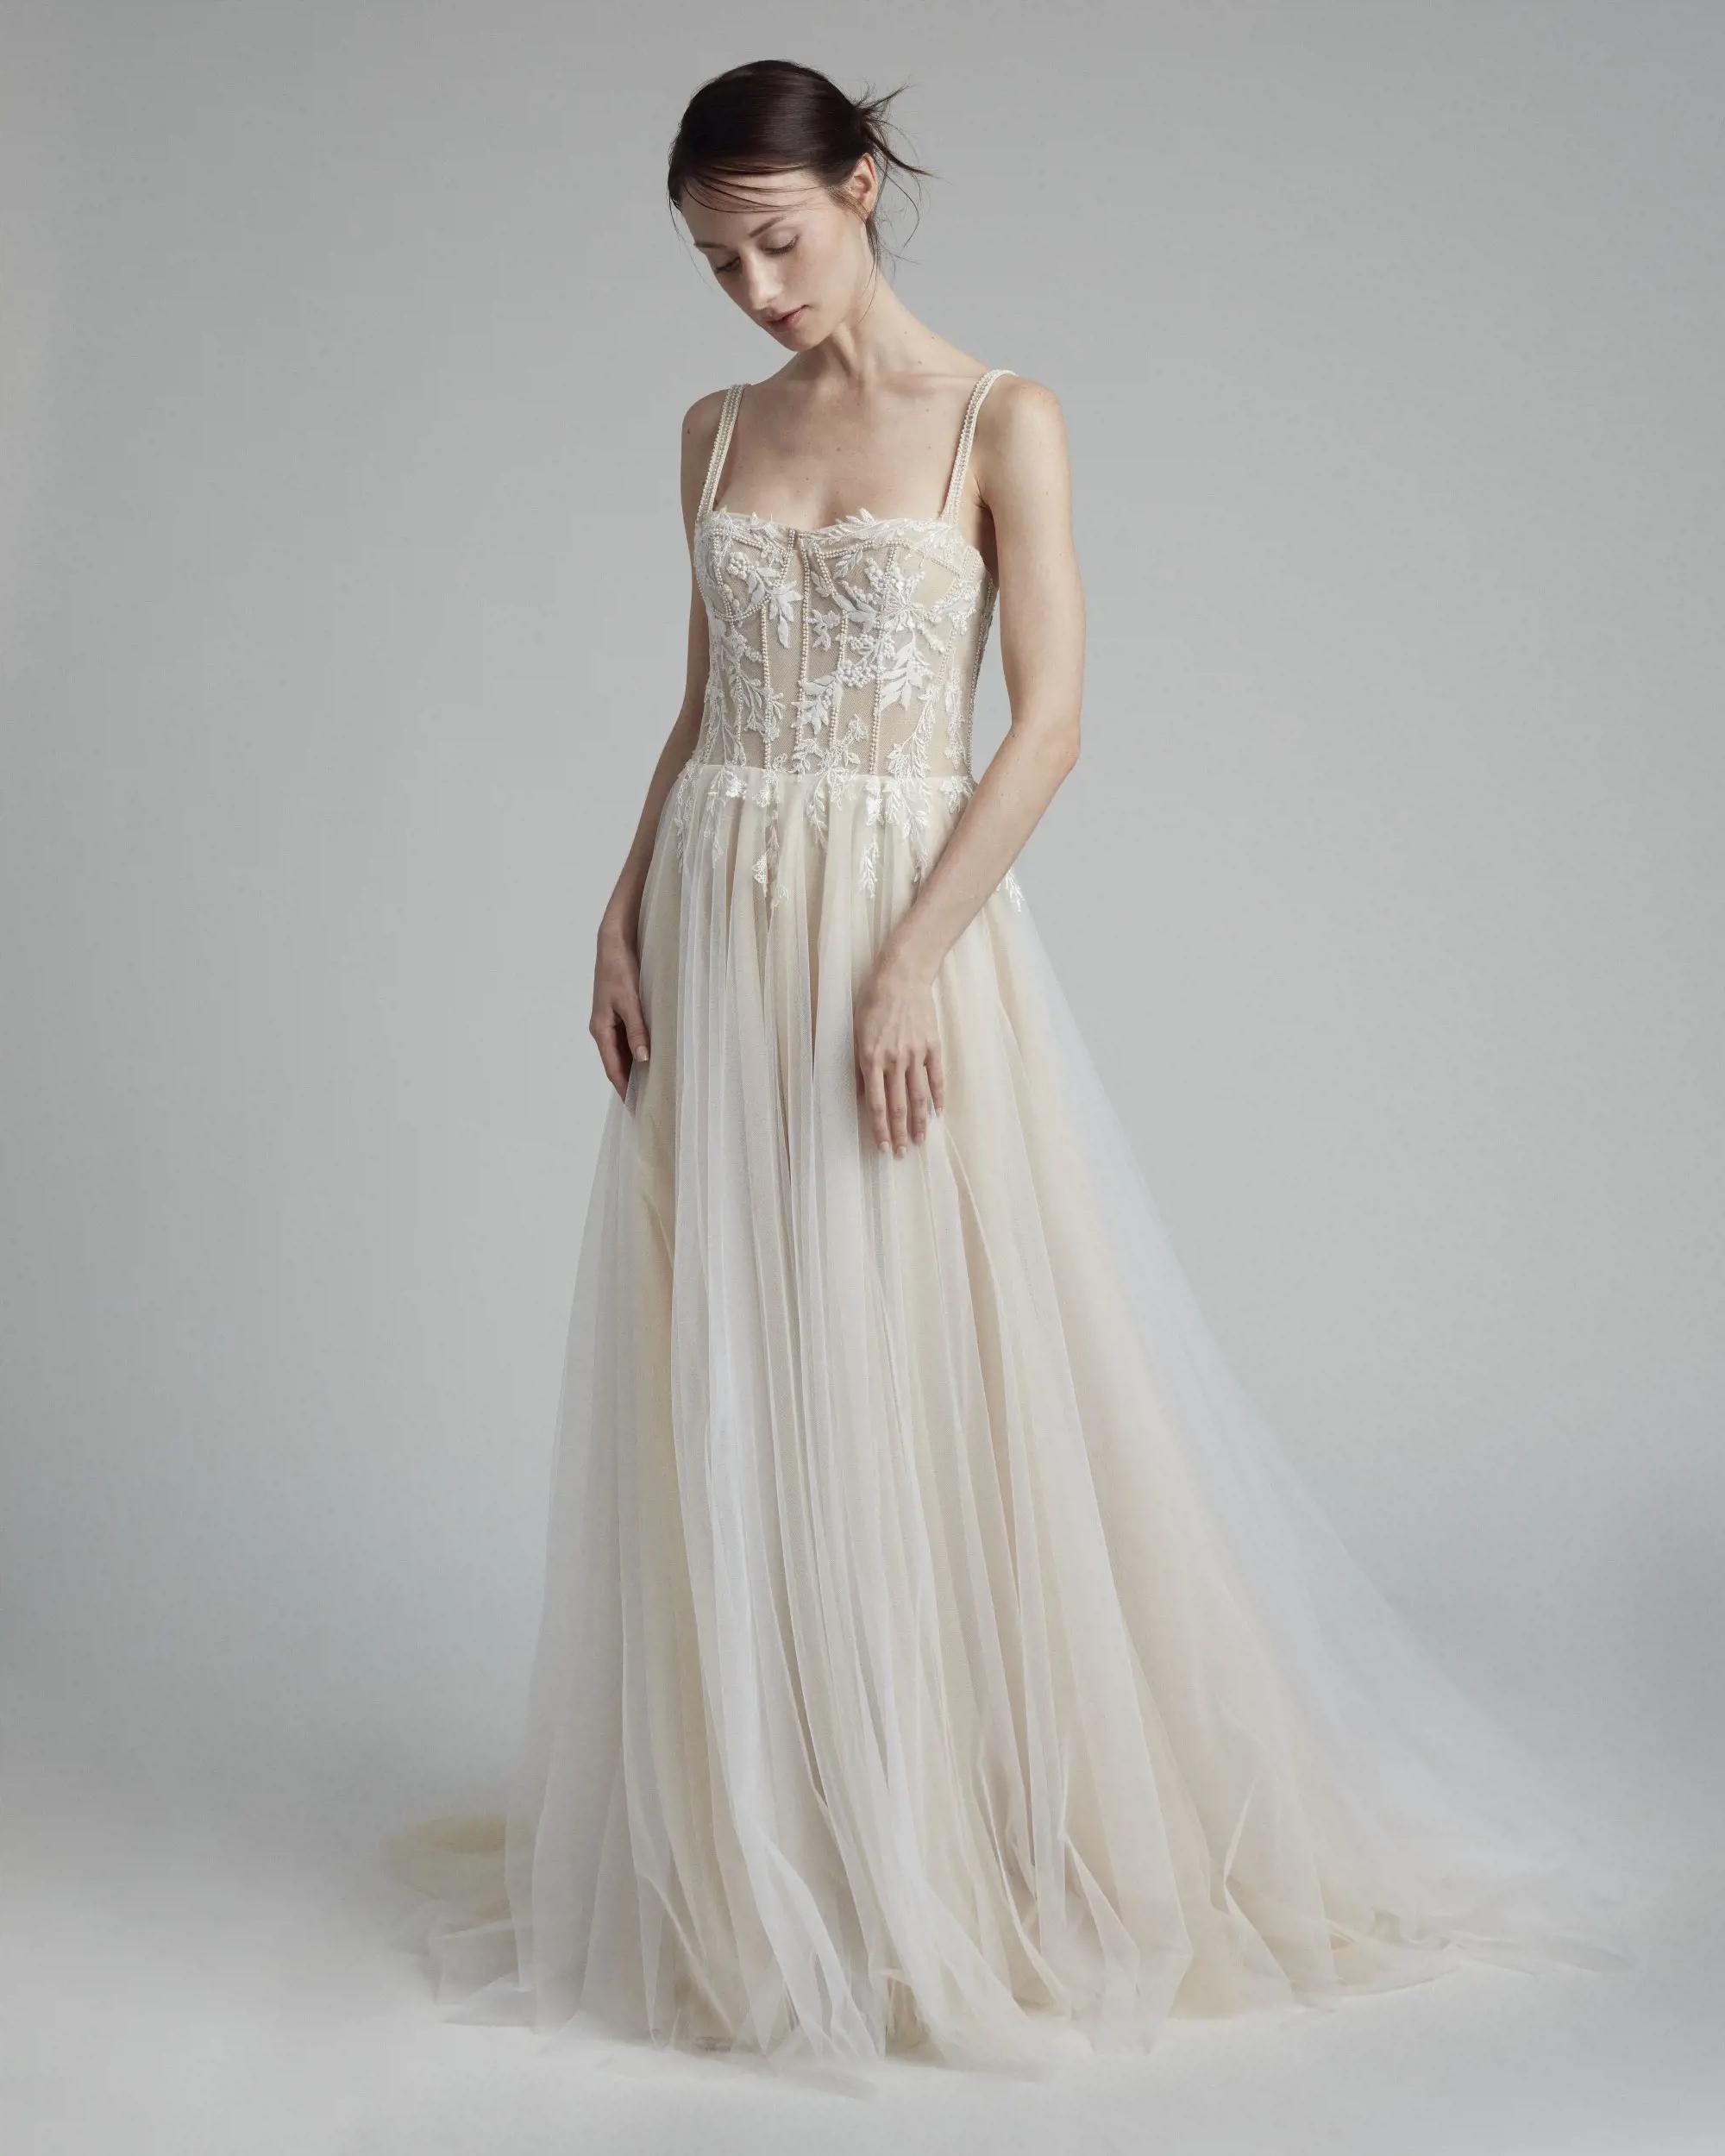 Bridal Gowns For Your Summer Wedding Image